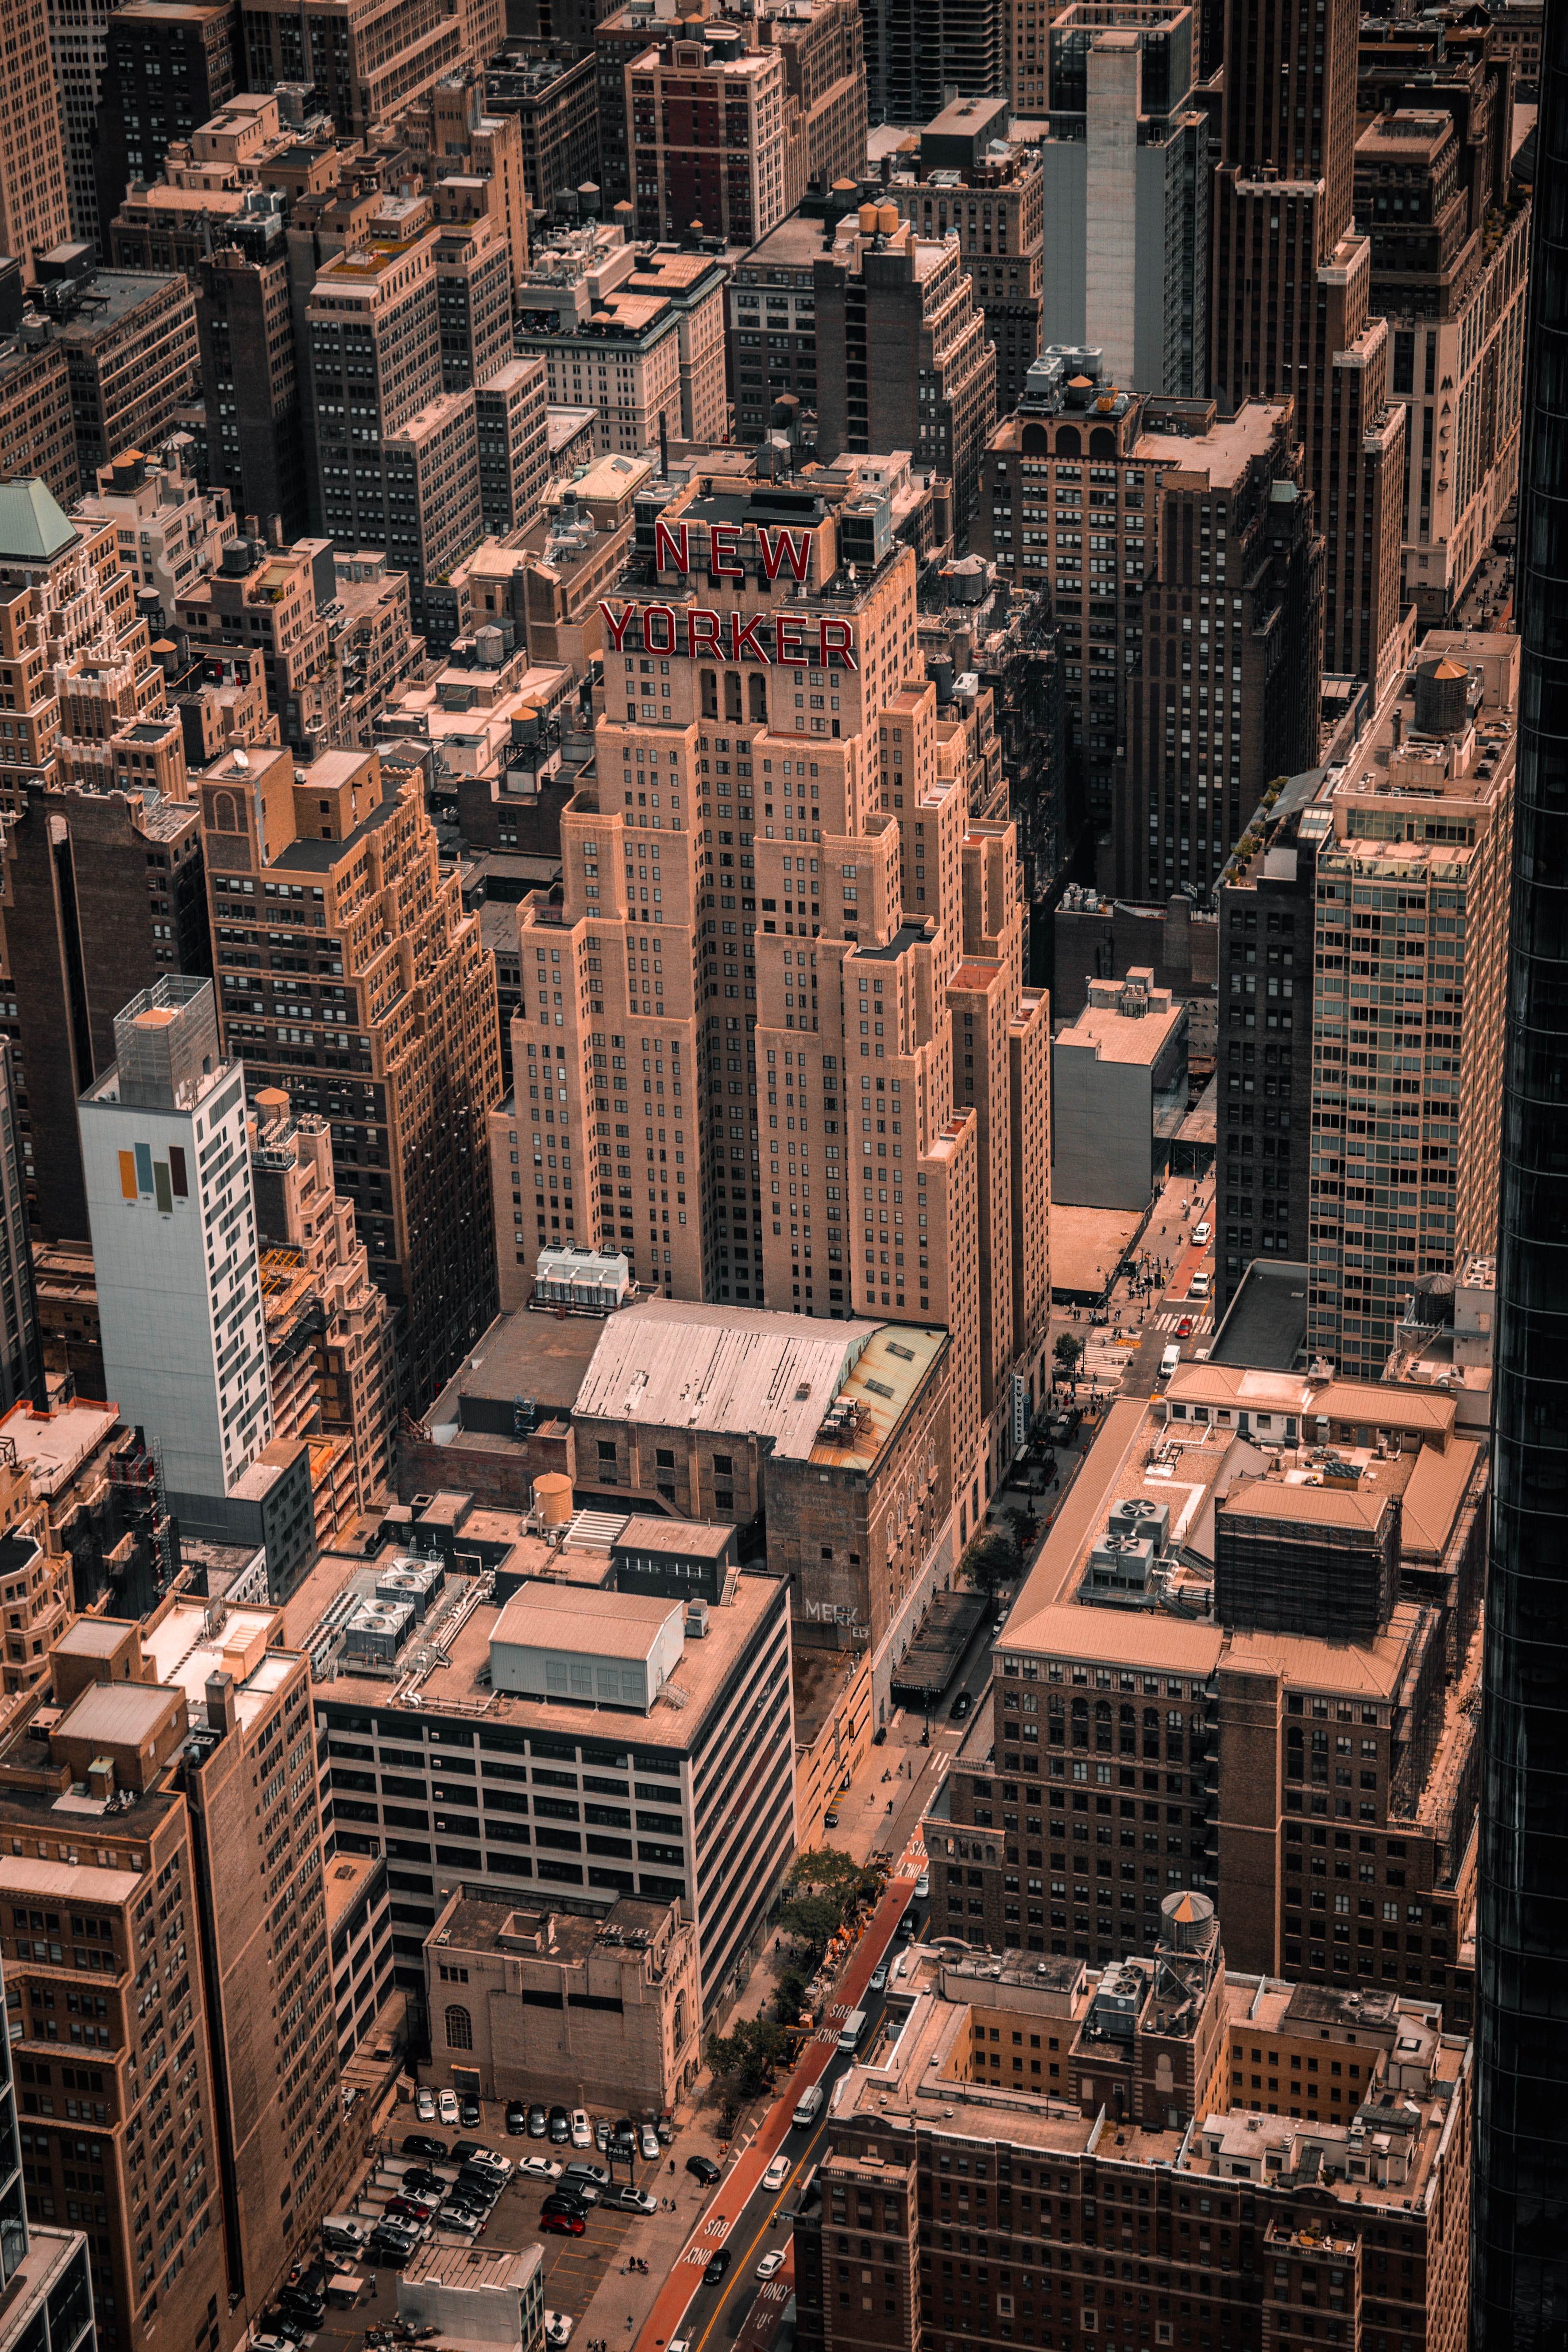 Tall, light brown, multi-level buildings crowded together in New York.